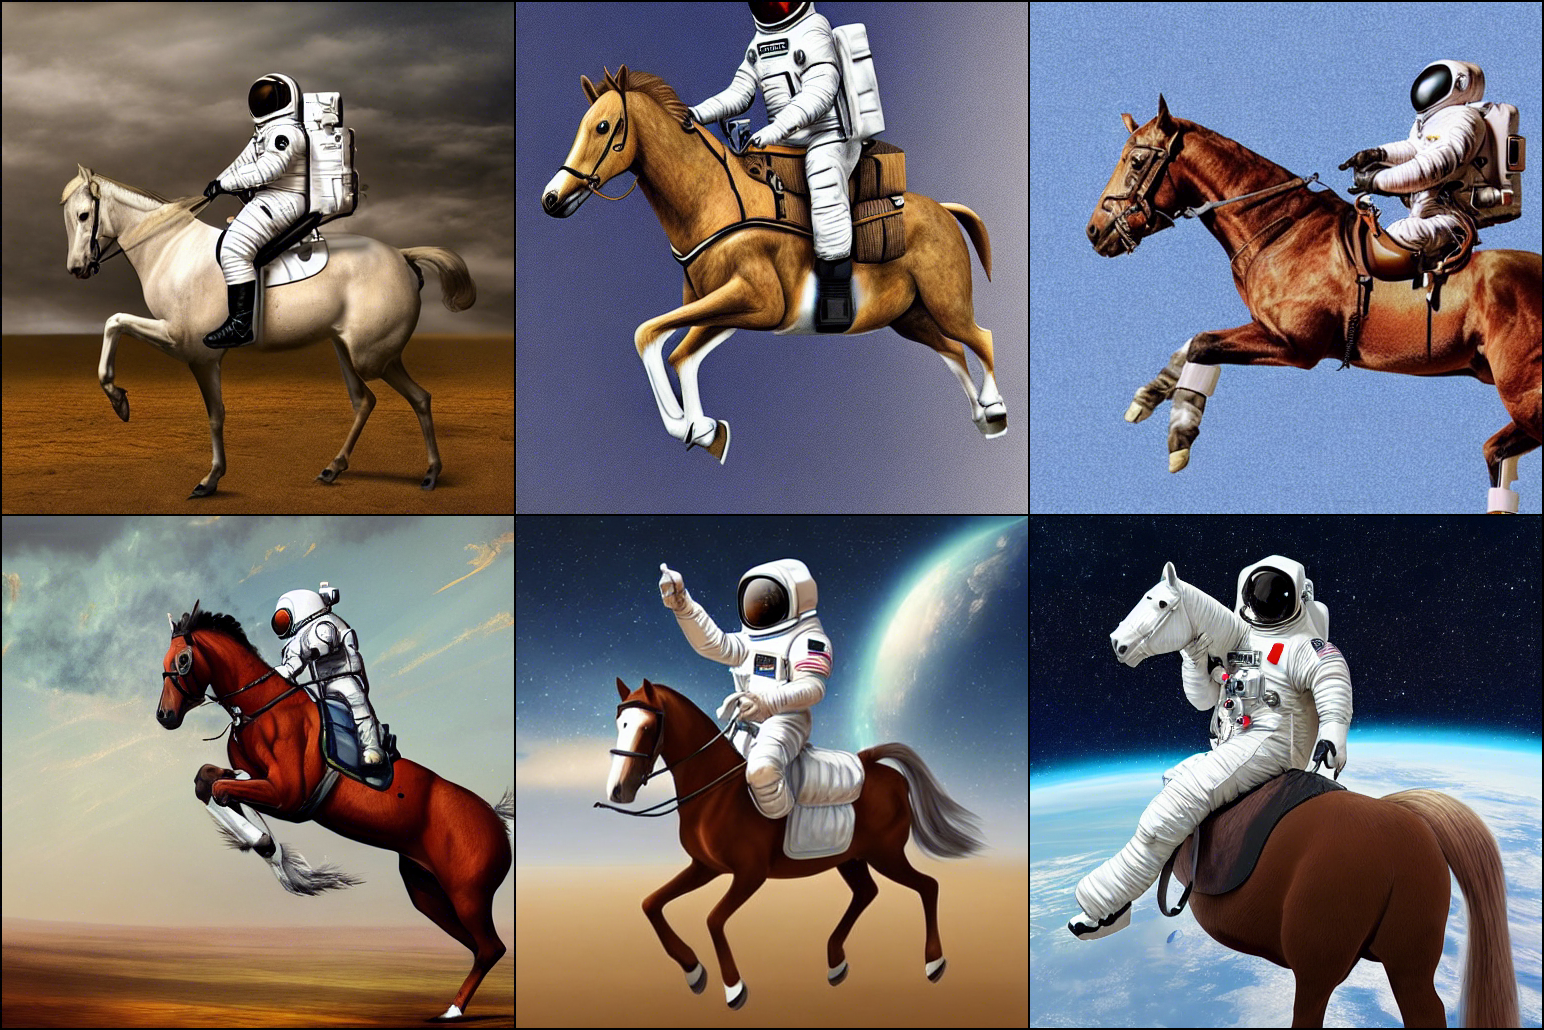 stable-diffusion-astronaut-riding-a-horse-in-photorealistic-style